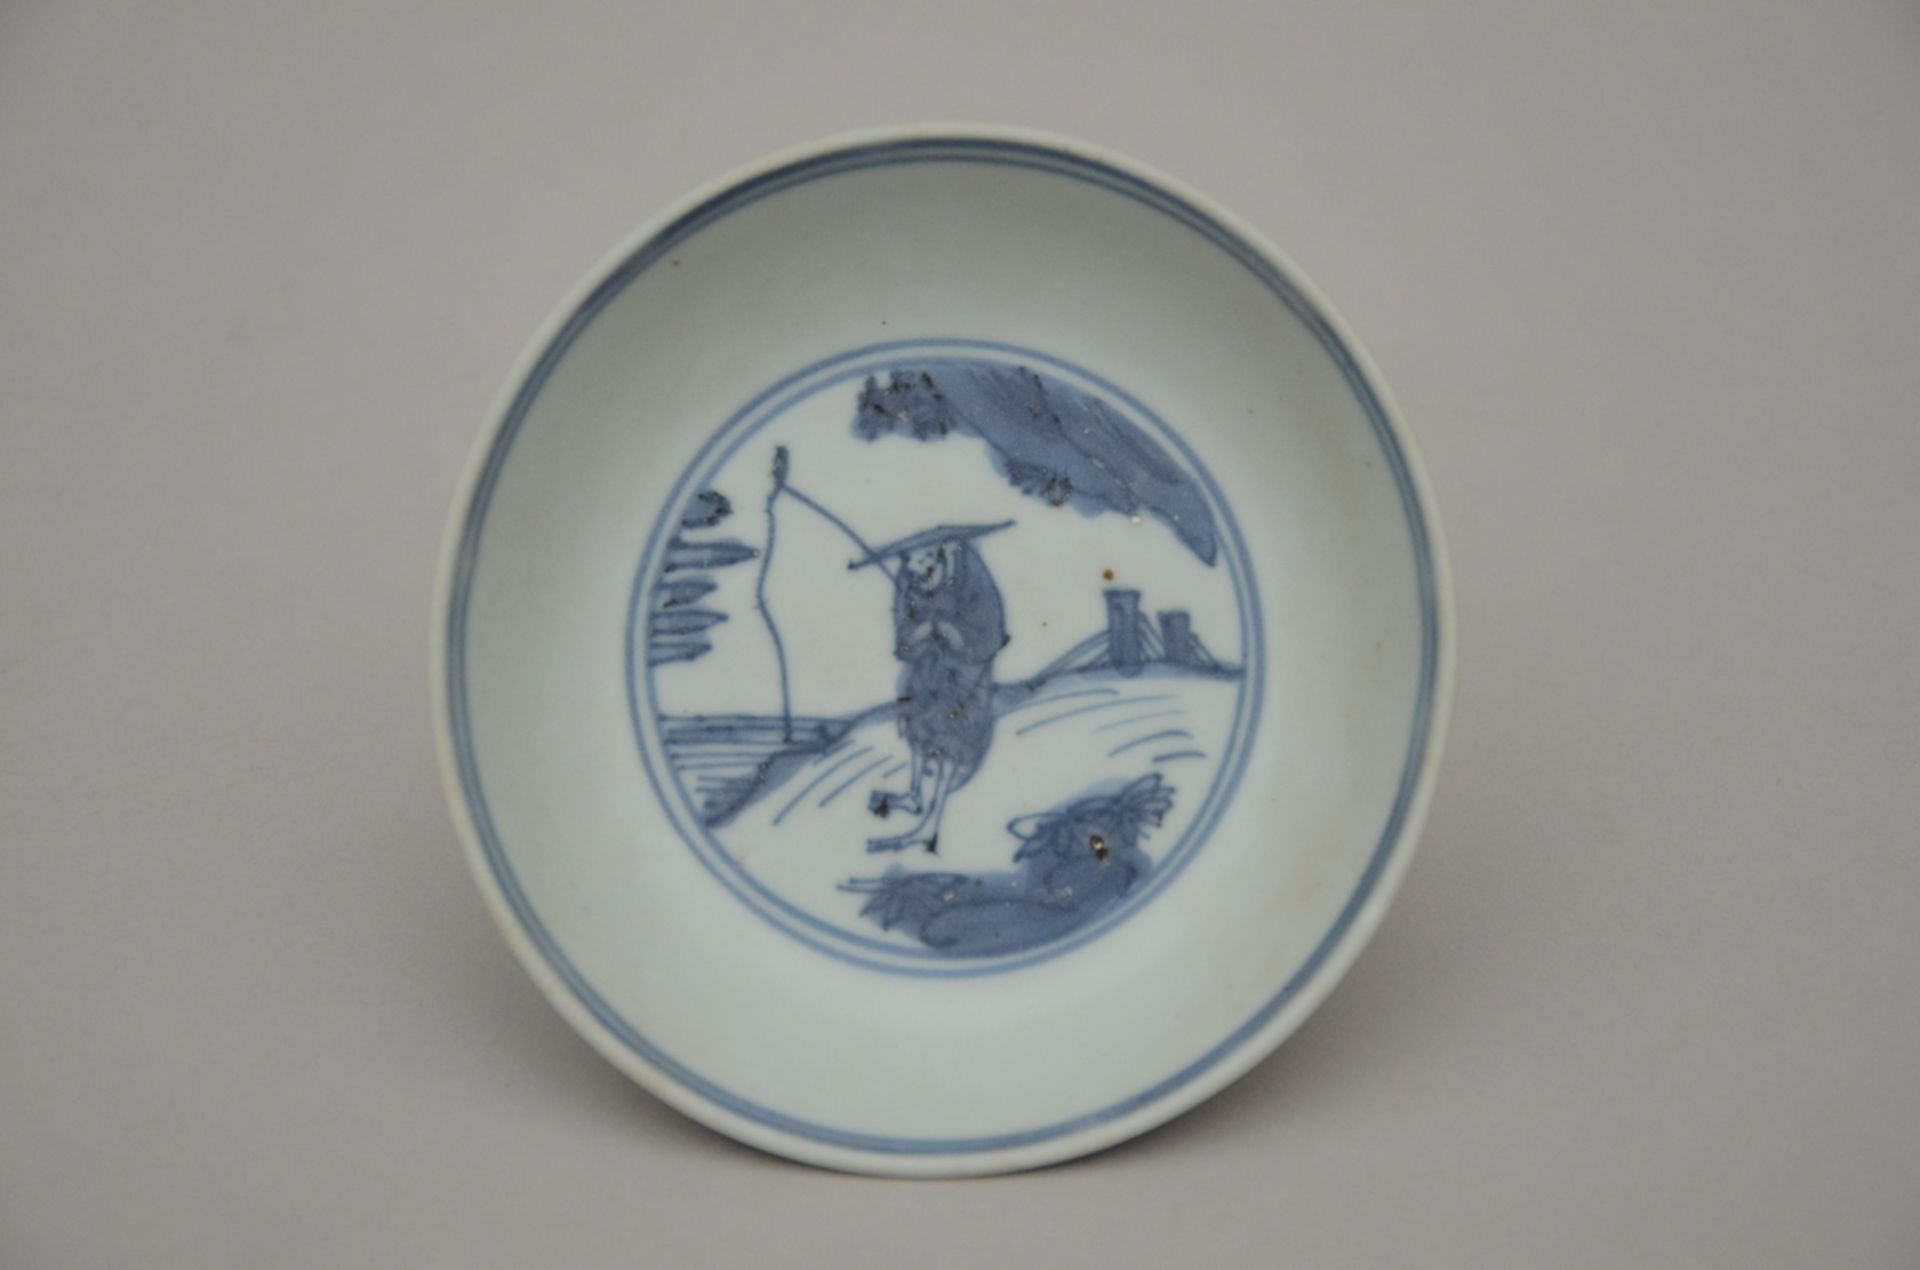 Ko-sometsuke plate in blue and white porcelain from a shipwreck (dia 10.5cm) (*)